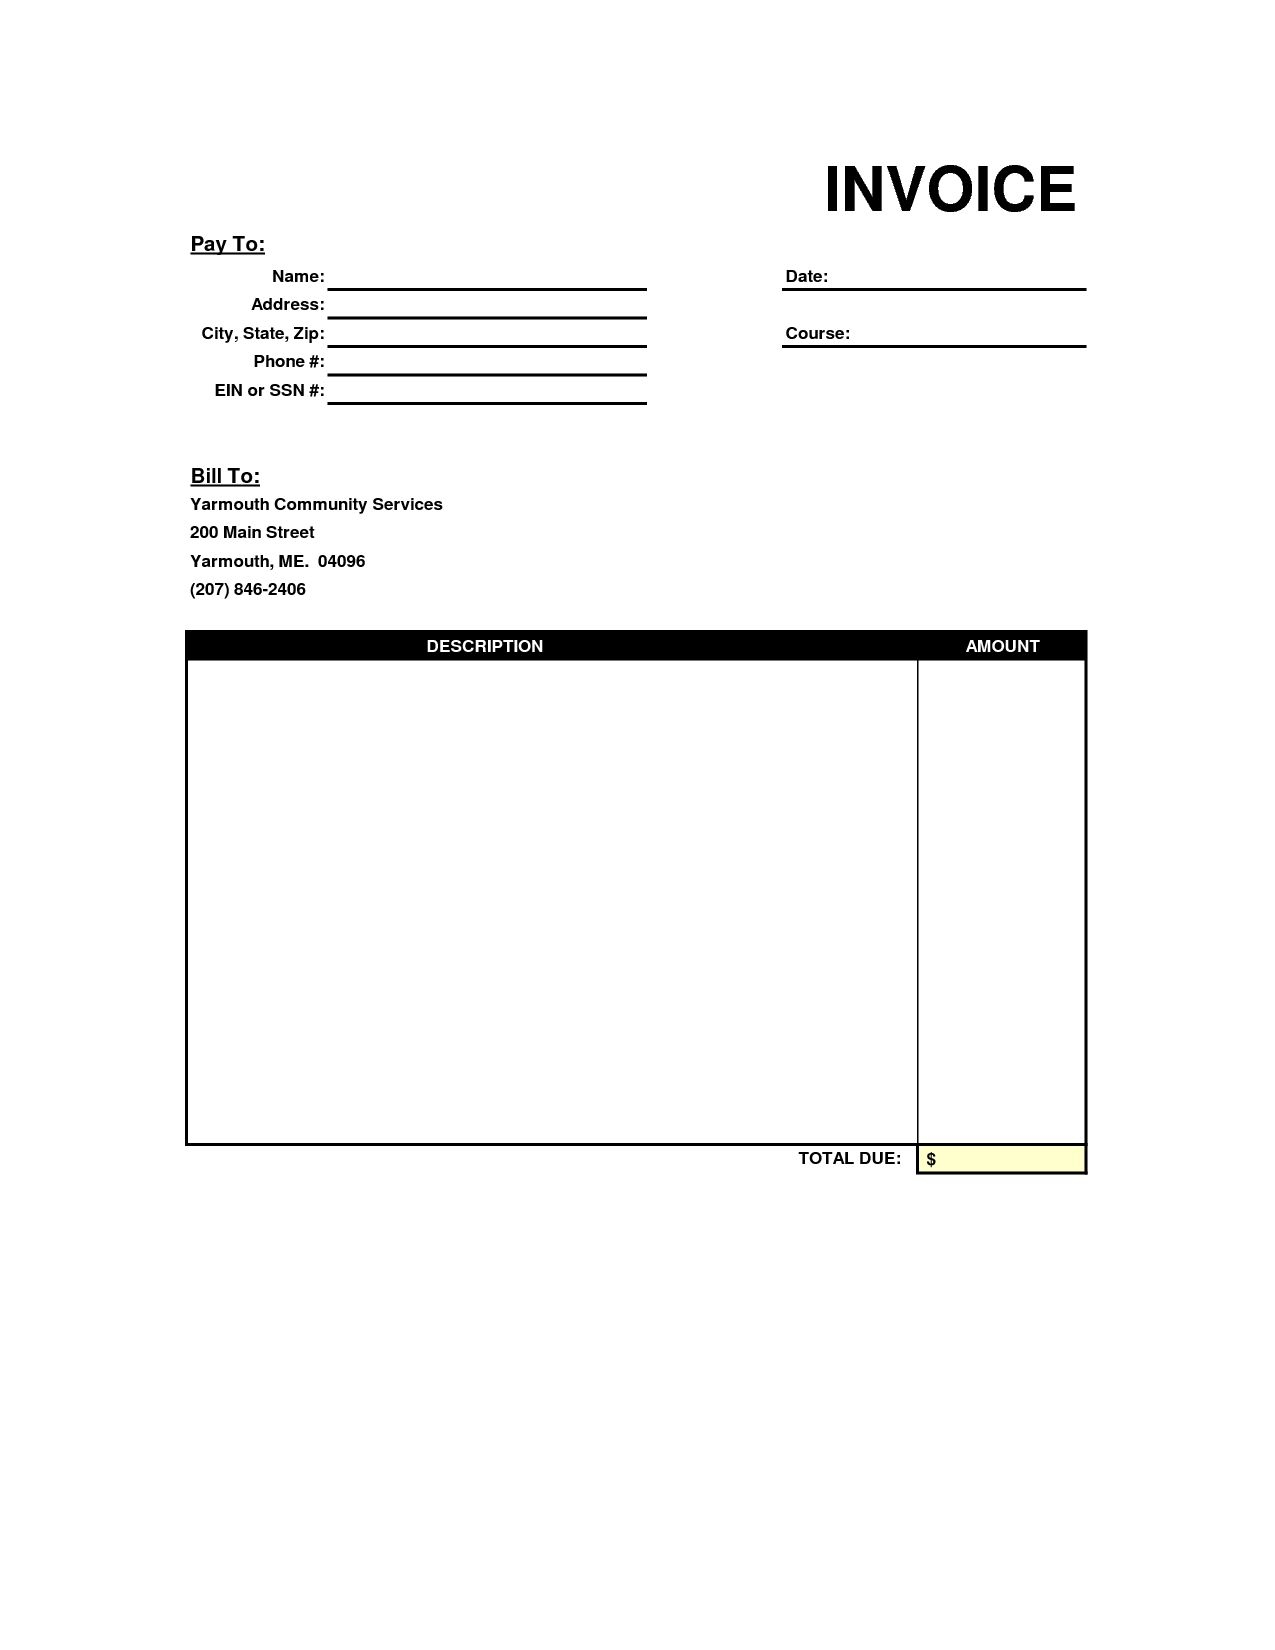 Blank Copy Of An Invoice Google Recruiter Resume Copy Of Blank - Free Printable Blank Invoice